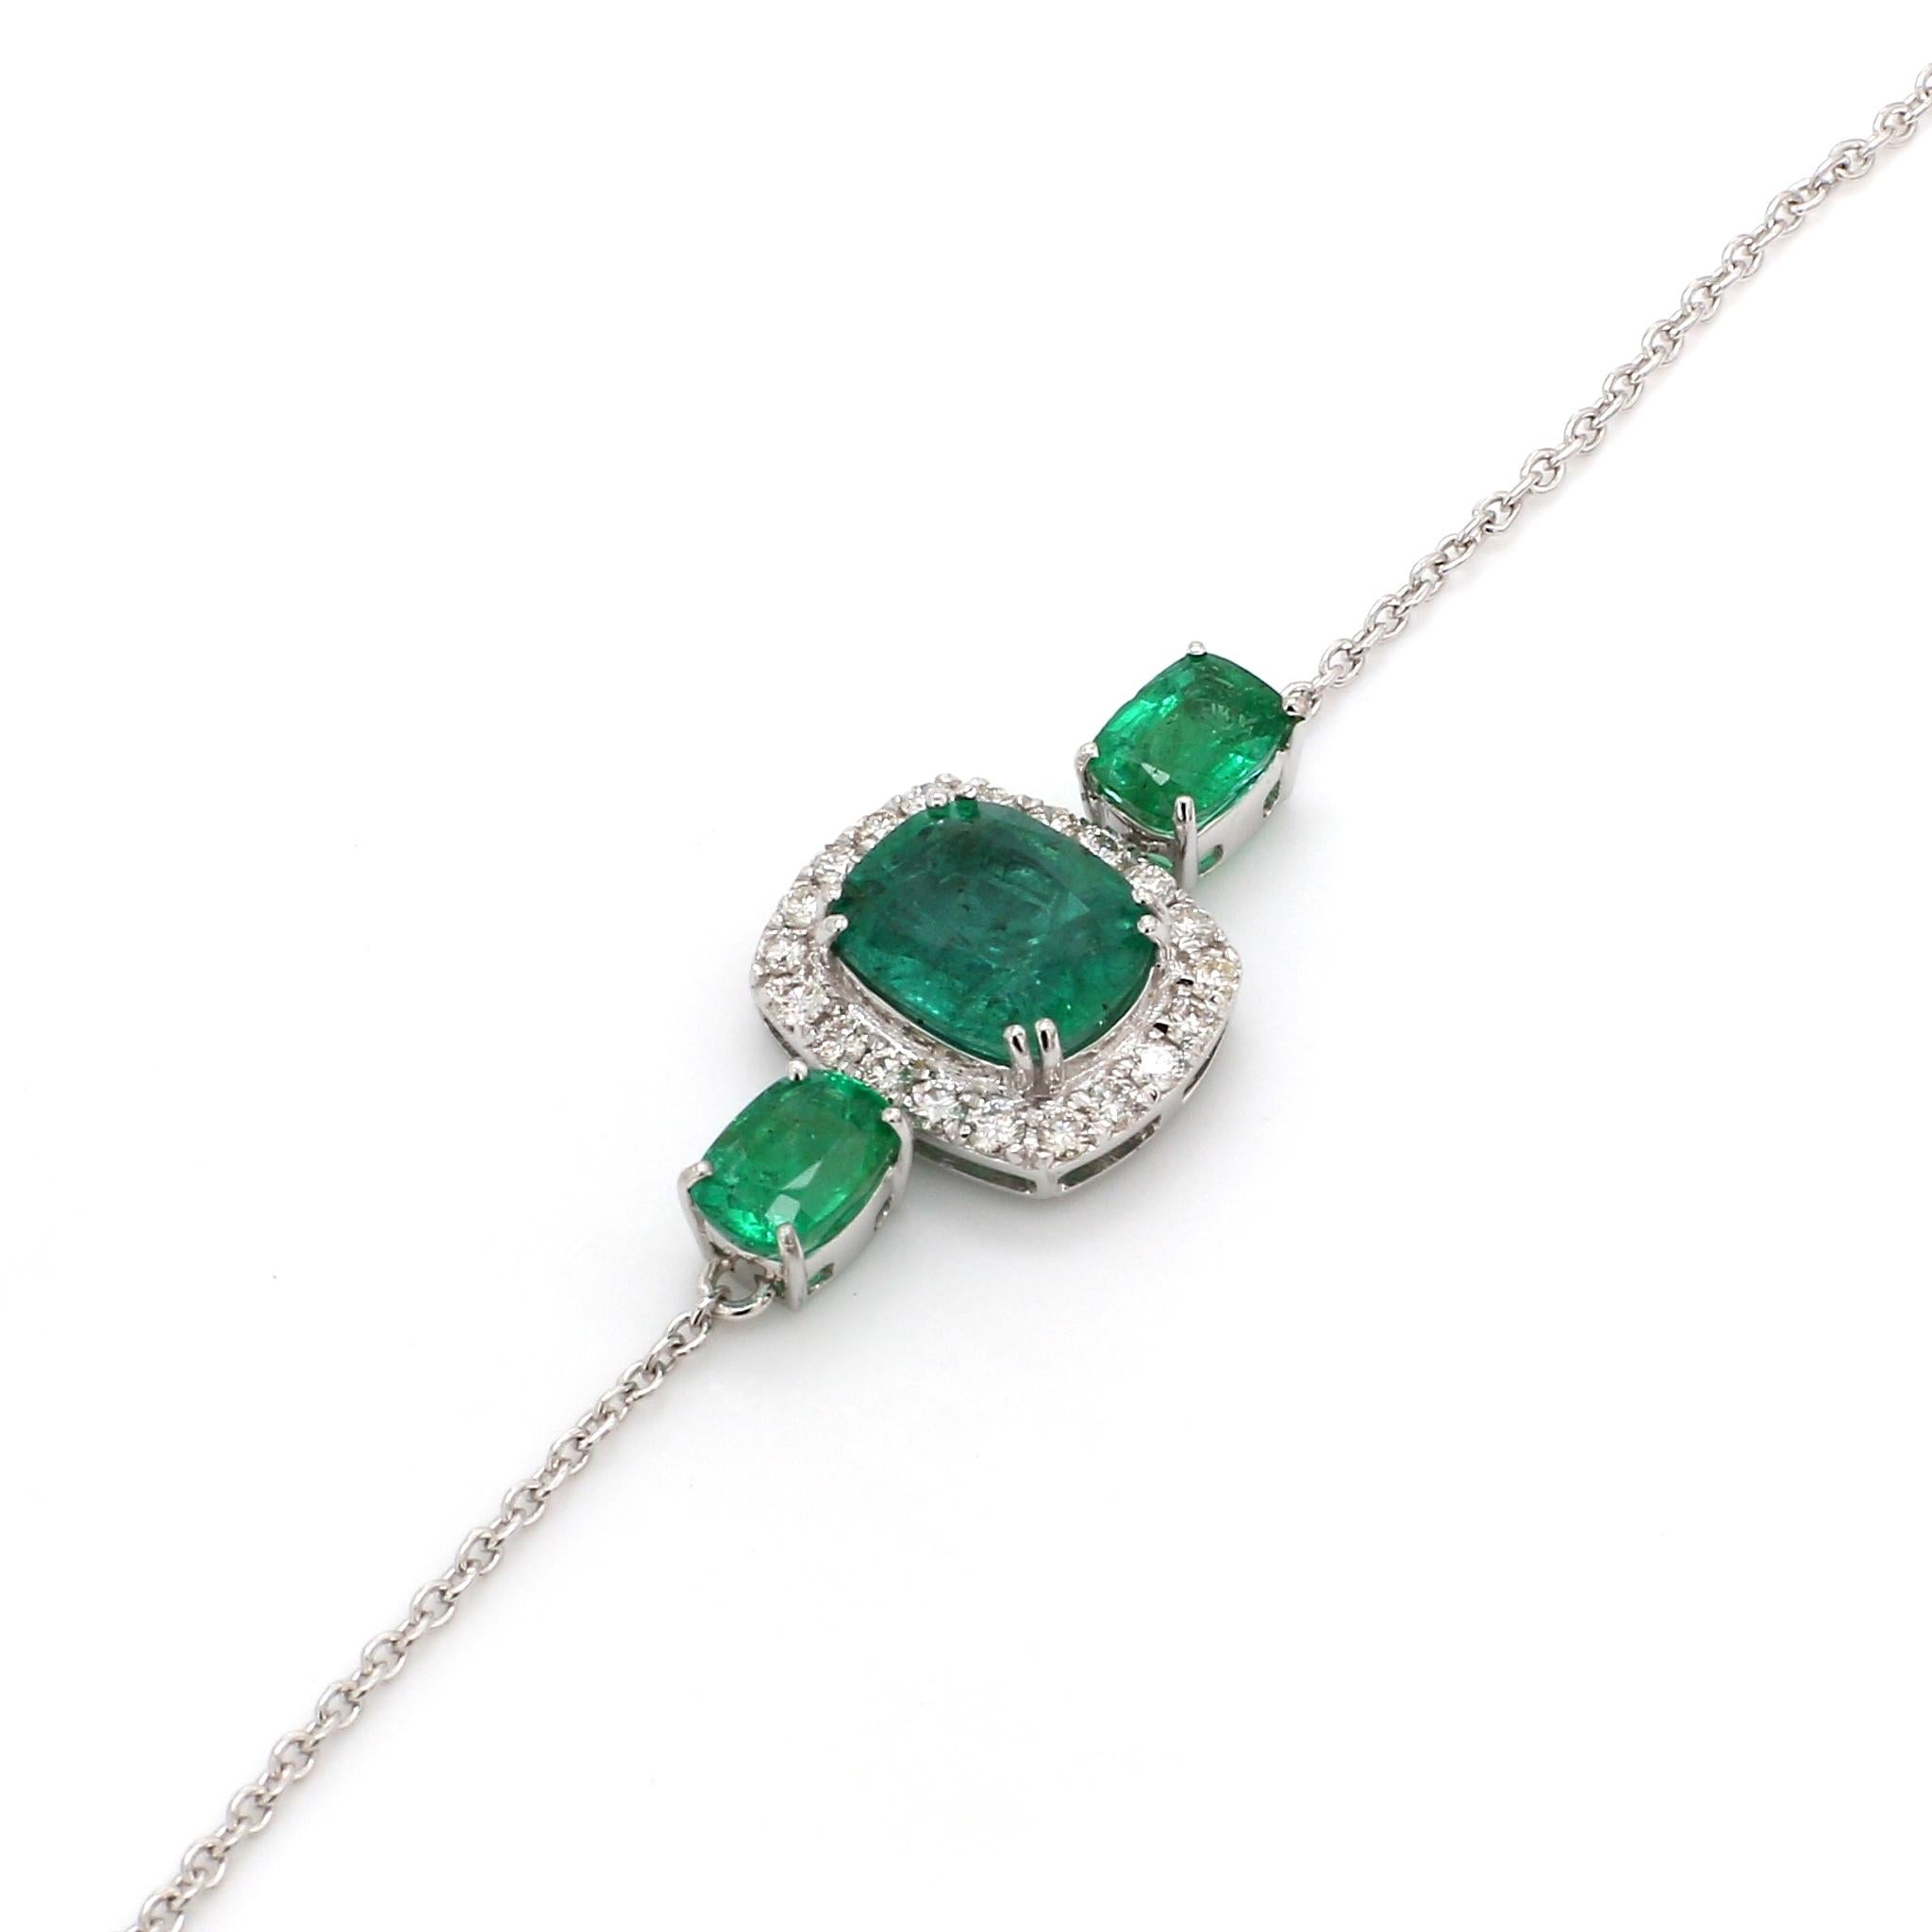 Crafted with precision and attention to detail, the bracelet is fashioned in luxurious 18 Karat White Gold, adding a timeless elegance to the design. The white gold setting provides the perfect backdrop for the emerald and diamonds, creating a